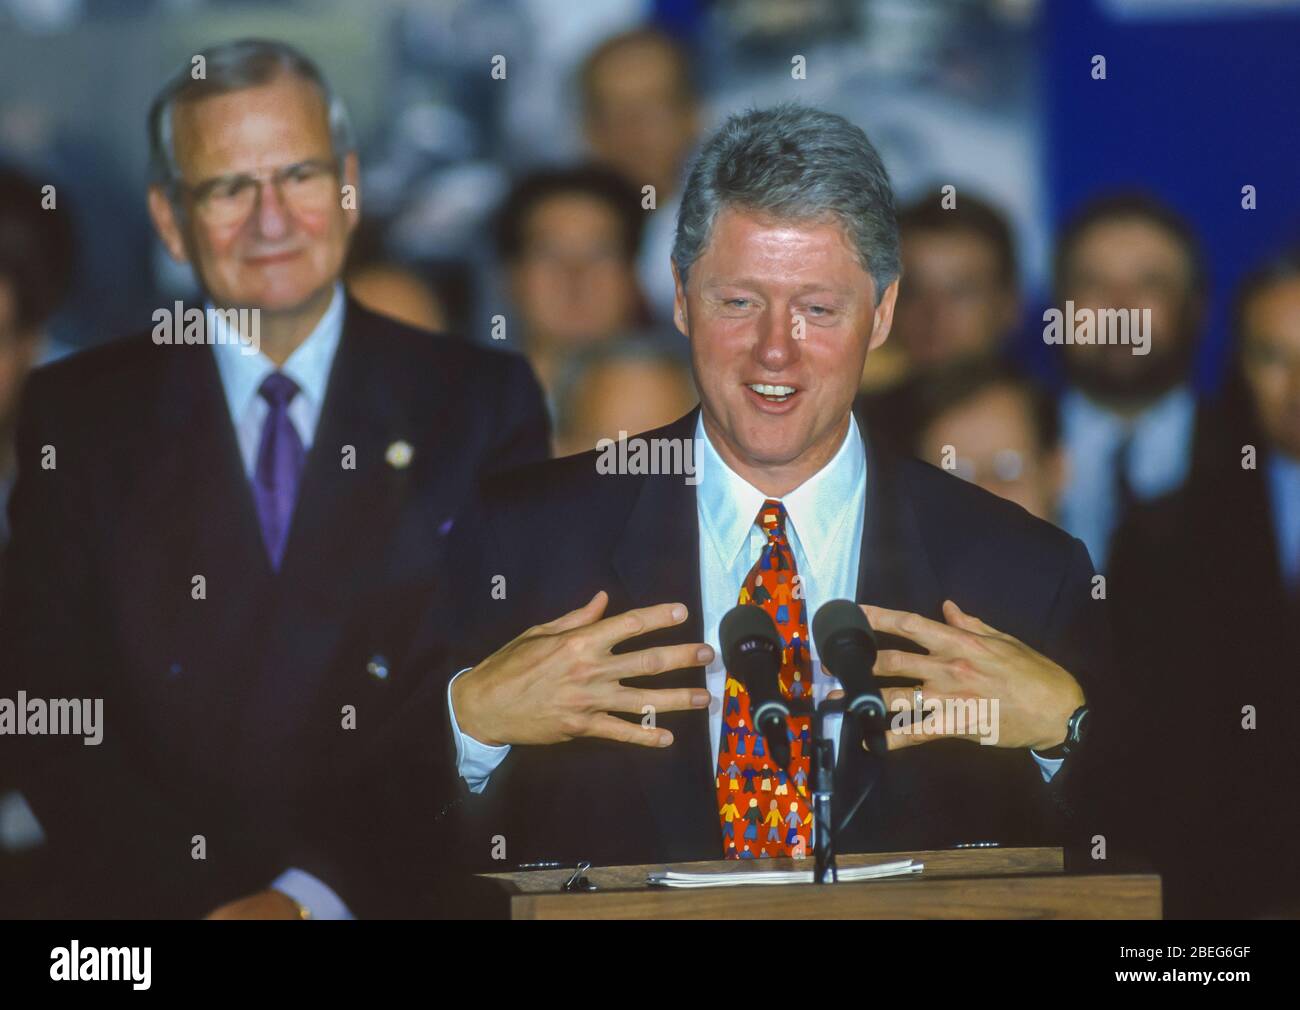 WASHINGTON, DC, USA, OCTOBER 20, 1993: President Bill Clinton speaks during NAFTA Day at White House. Lee Iacoca at left. Stock Photo